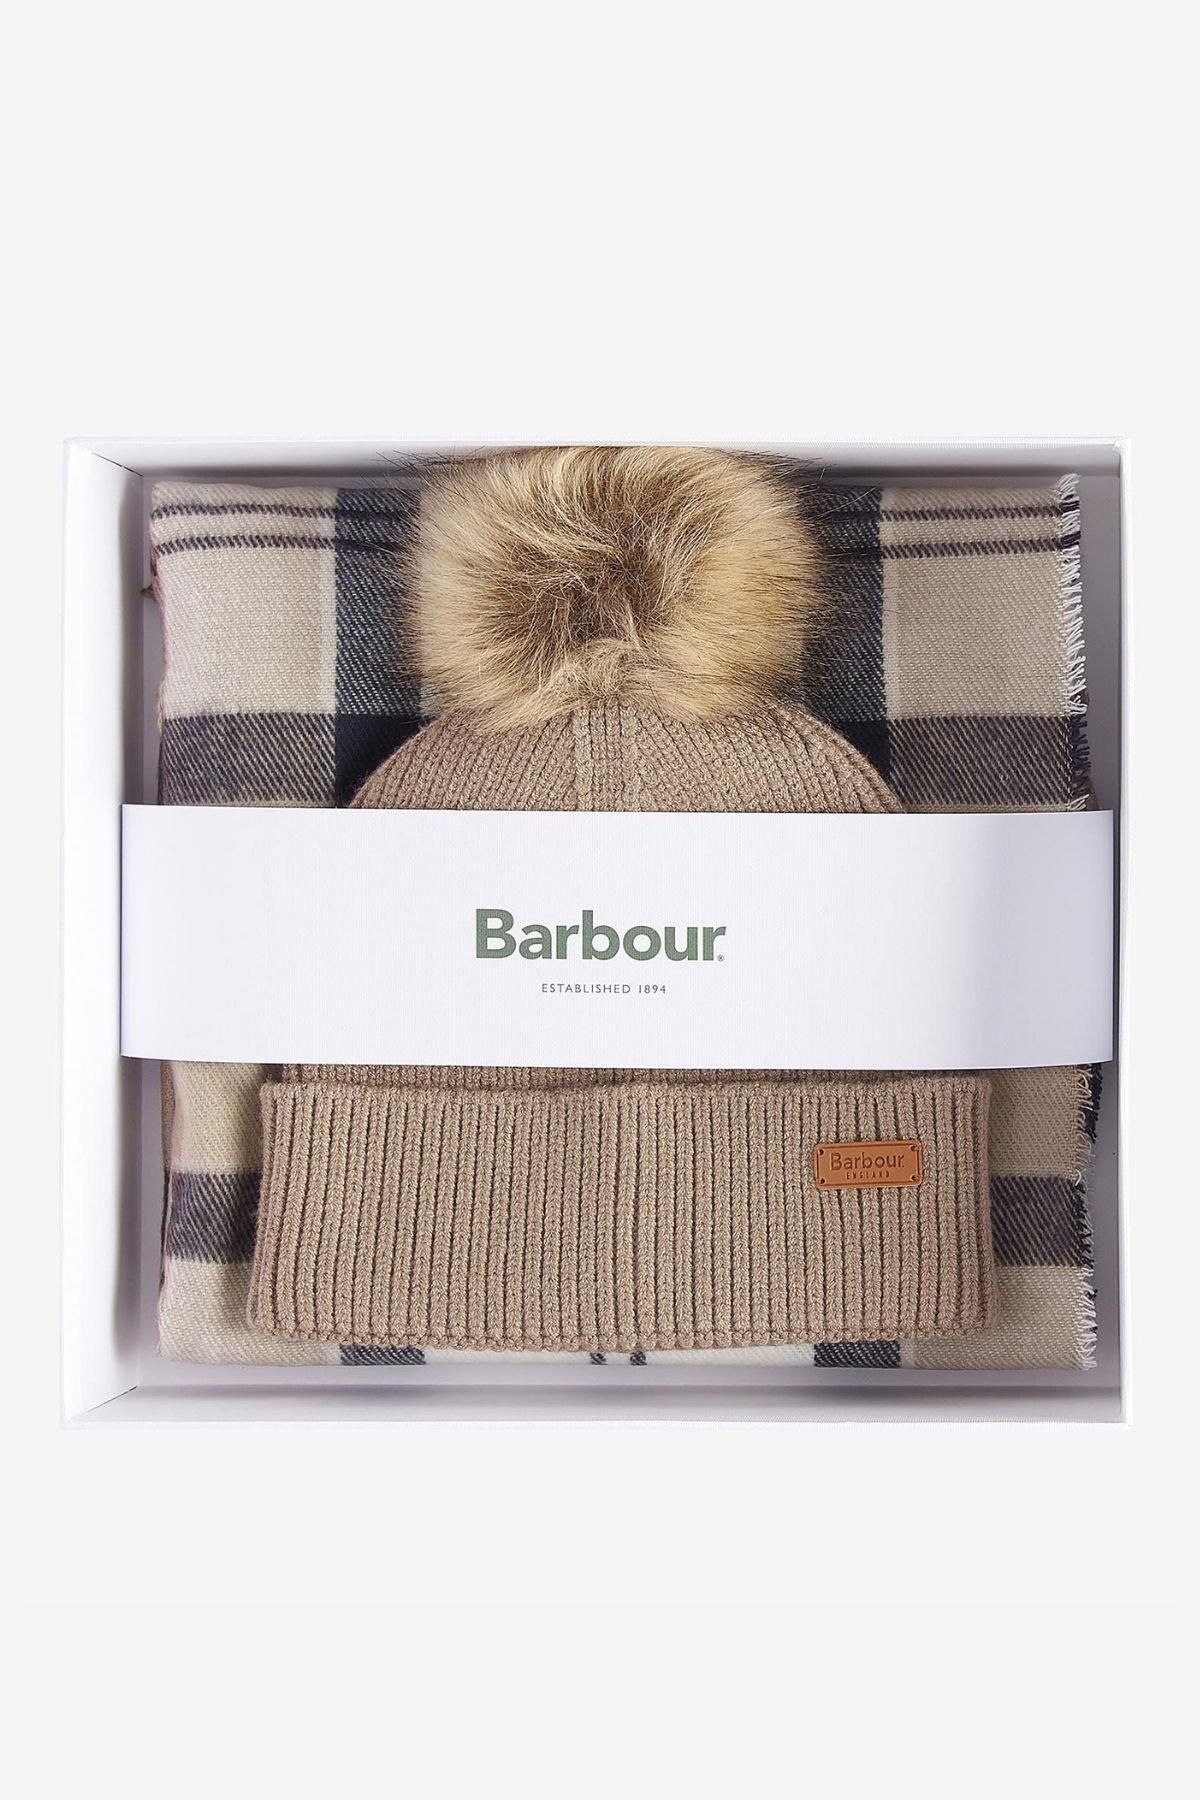 Barbour Dover Bere & Hailes Scarf Gift Set Be71 Rosewood